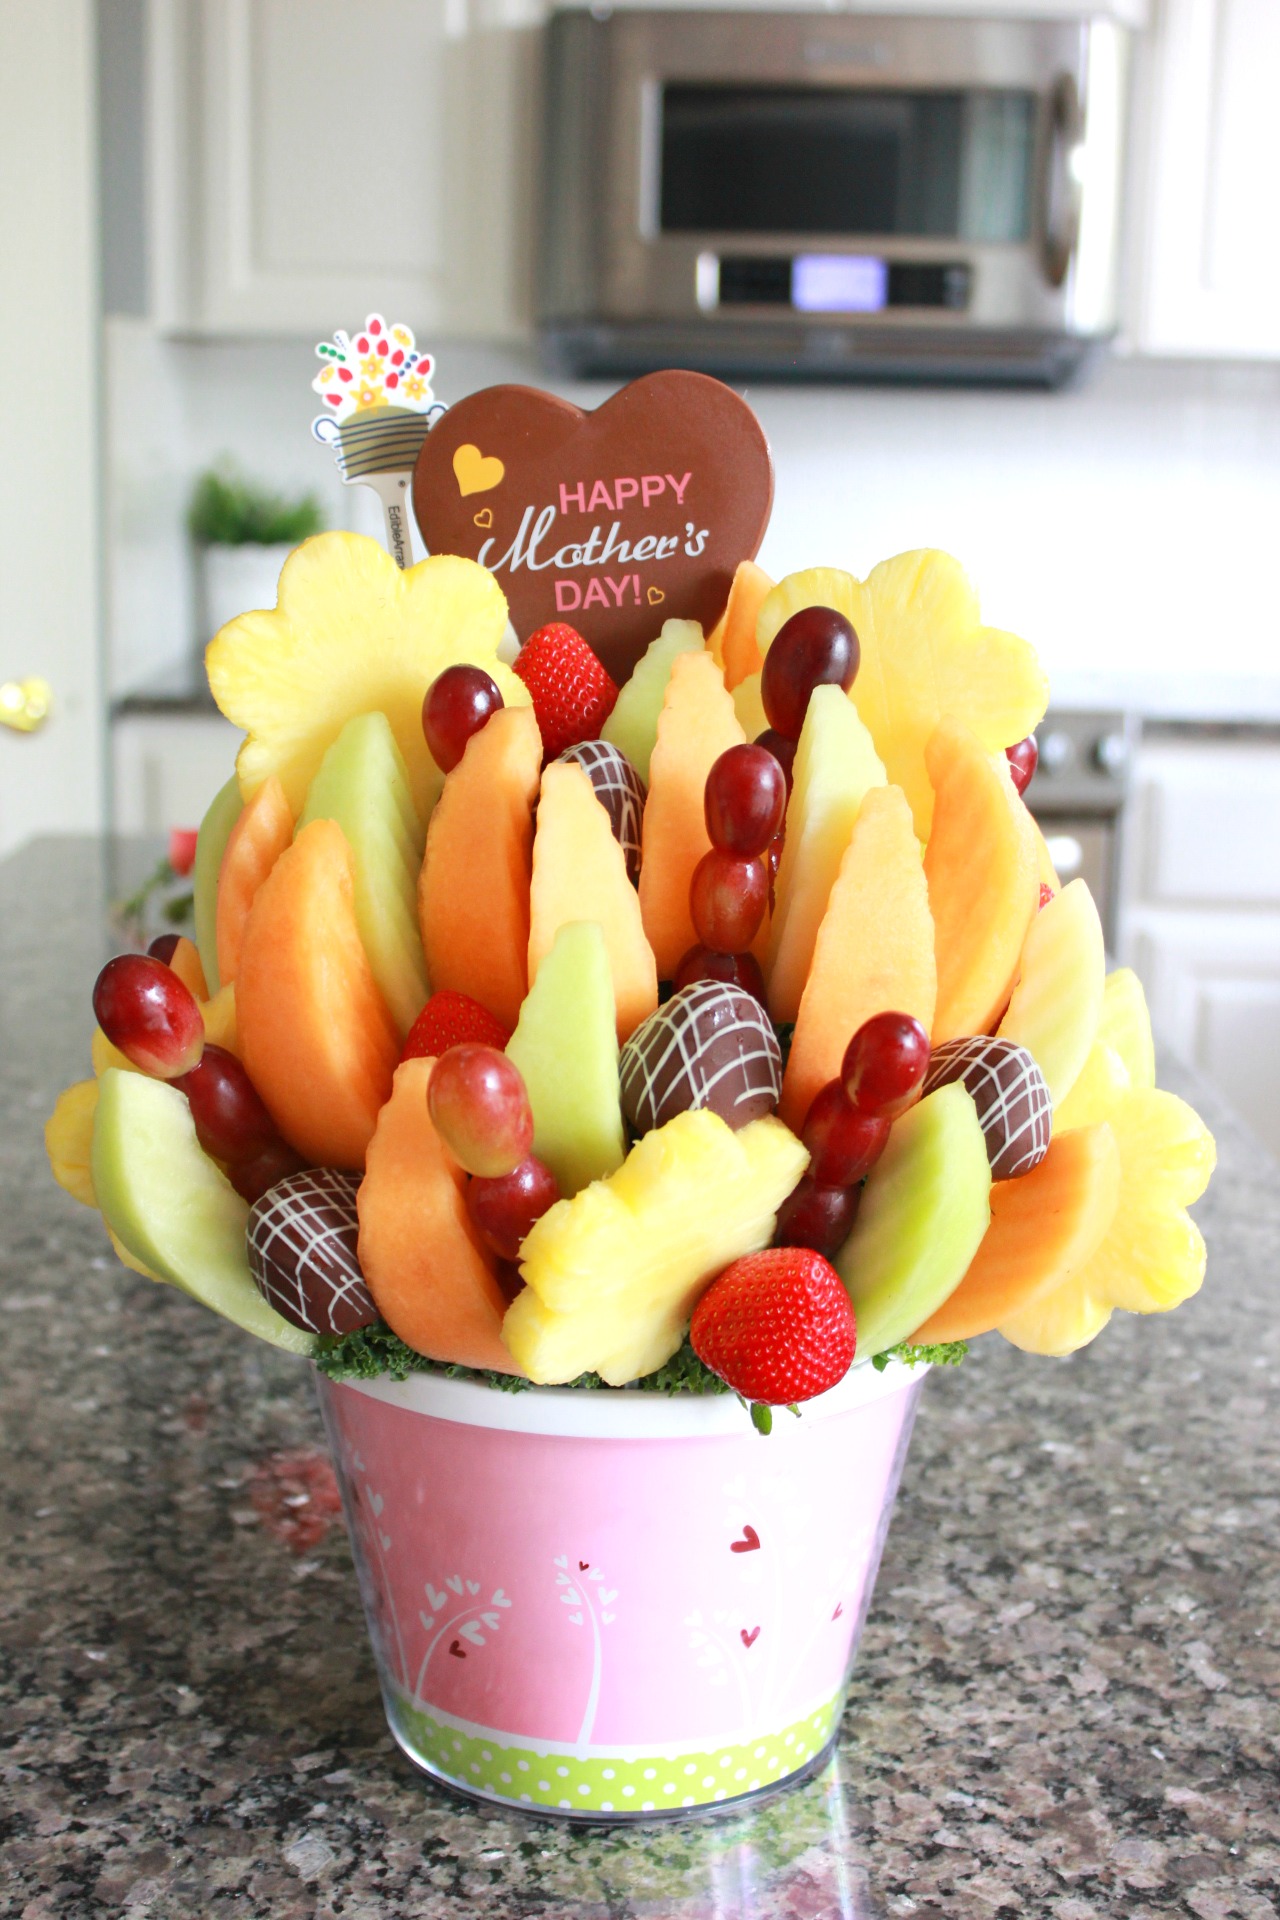 Edible Arrangements Perfect Gift For 